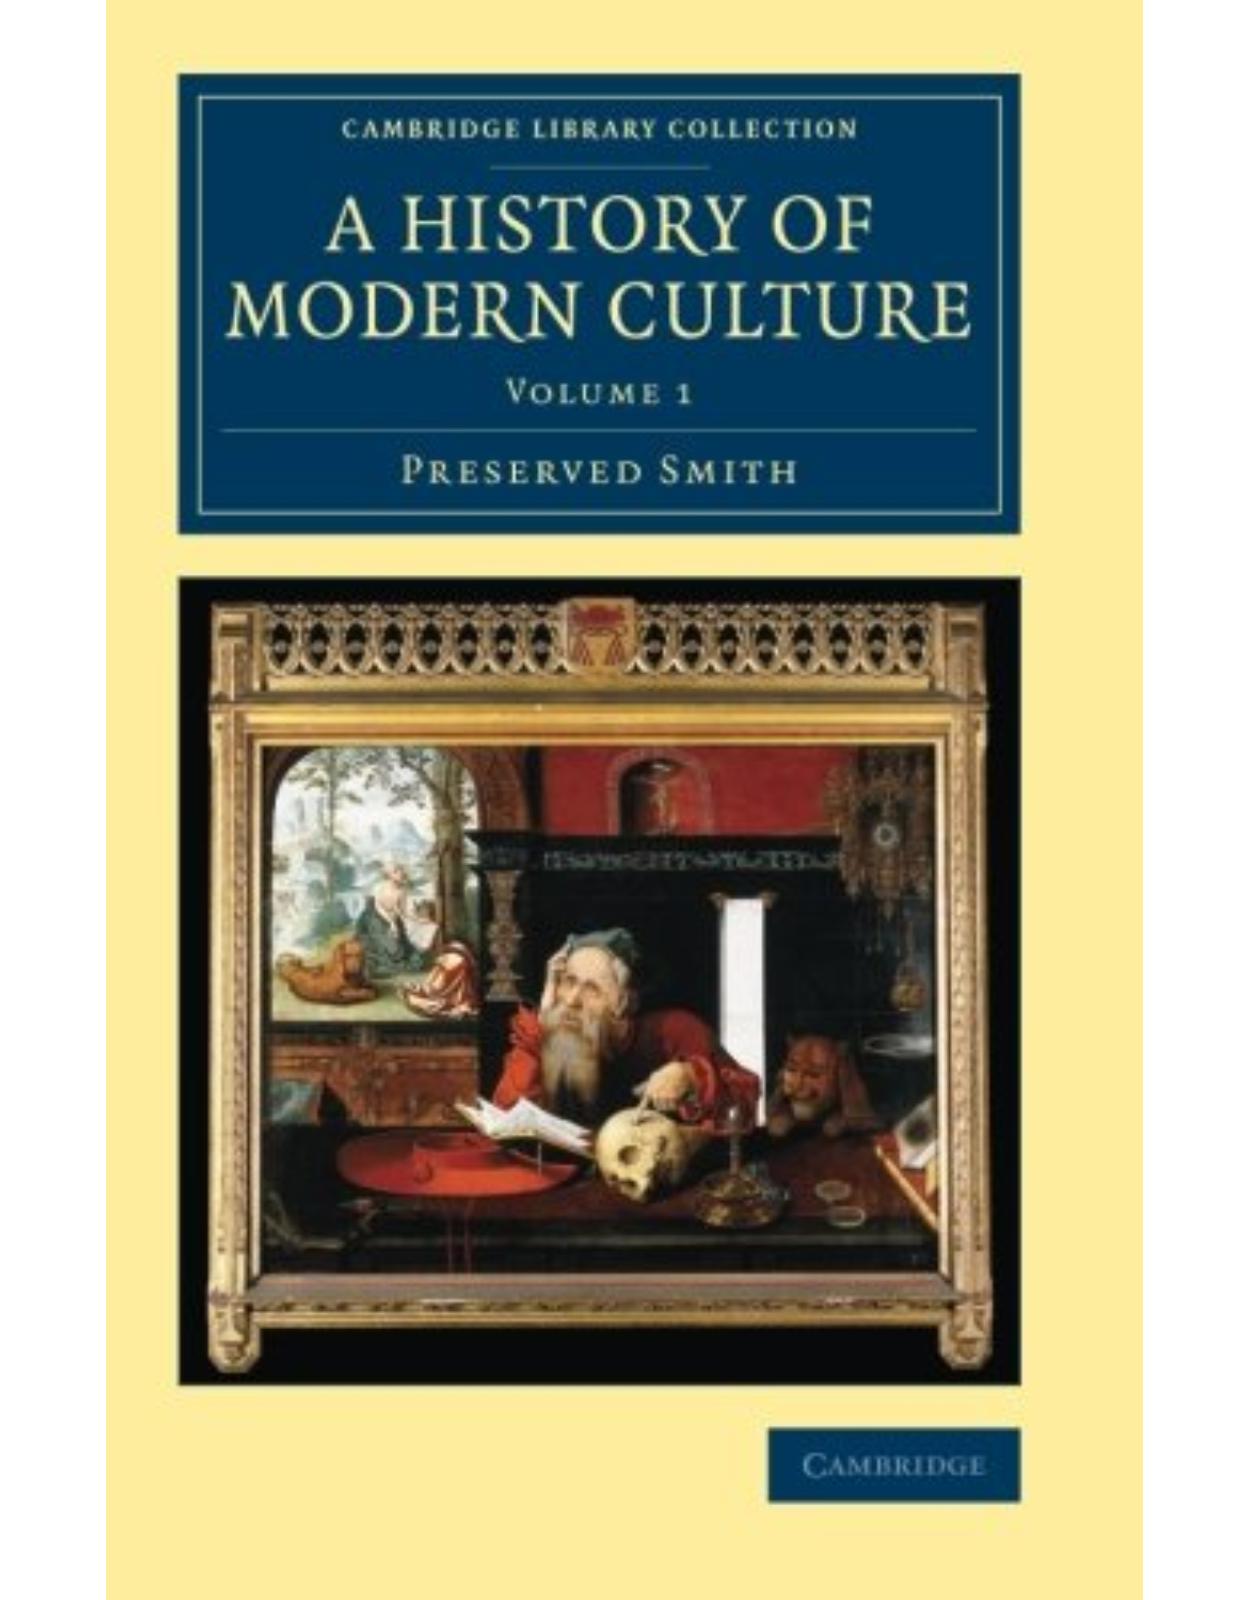 A History of Modern Culture: Volume 1 (Cambridge Library Collection - European History)